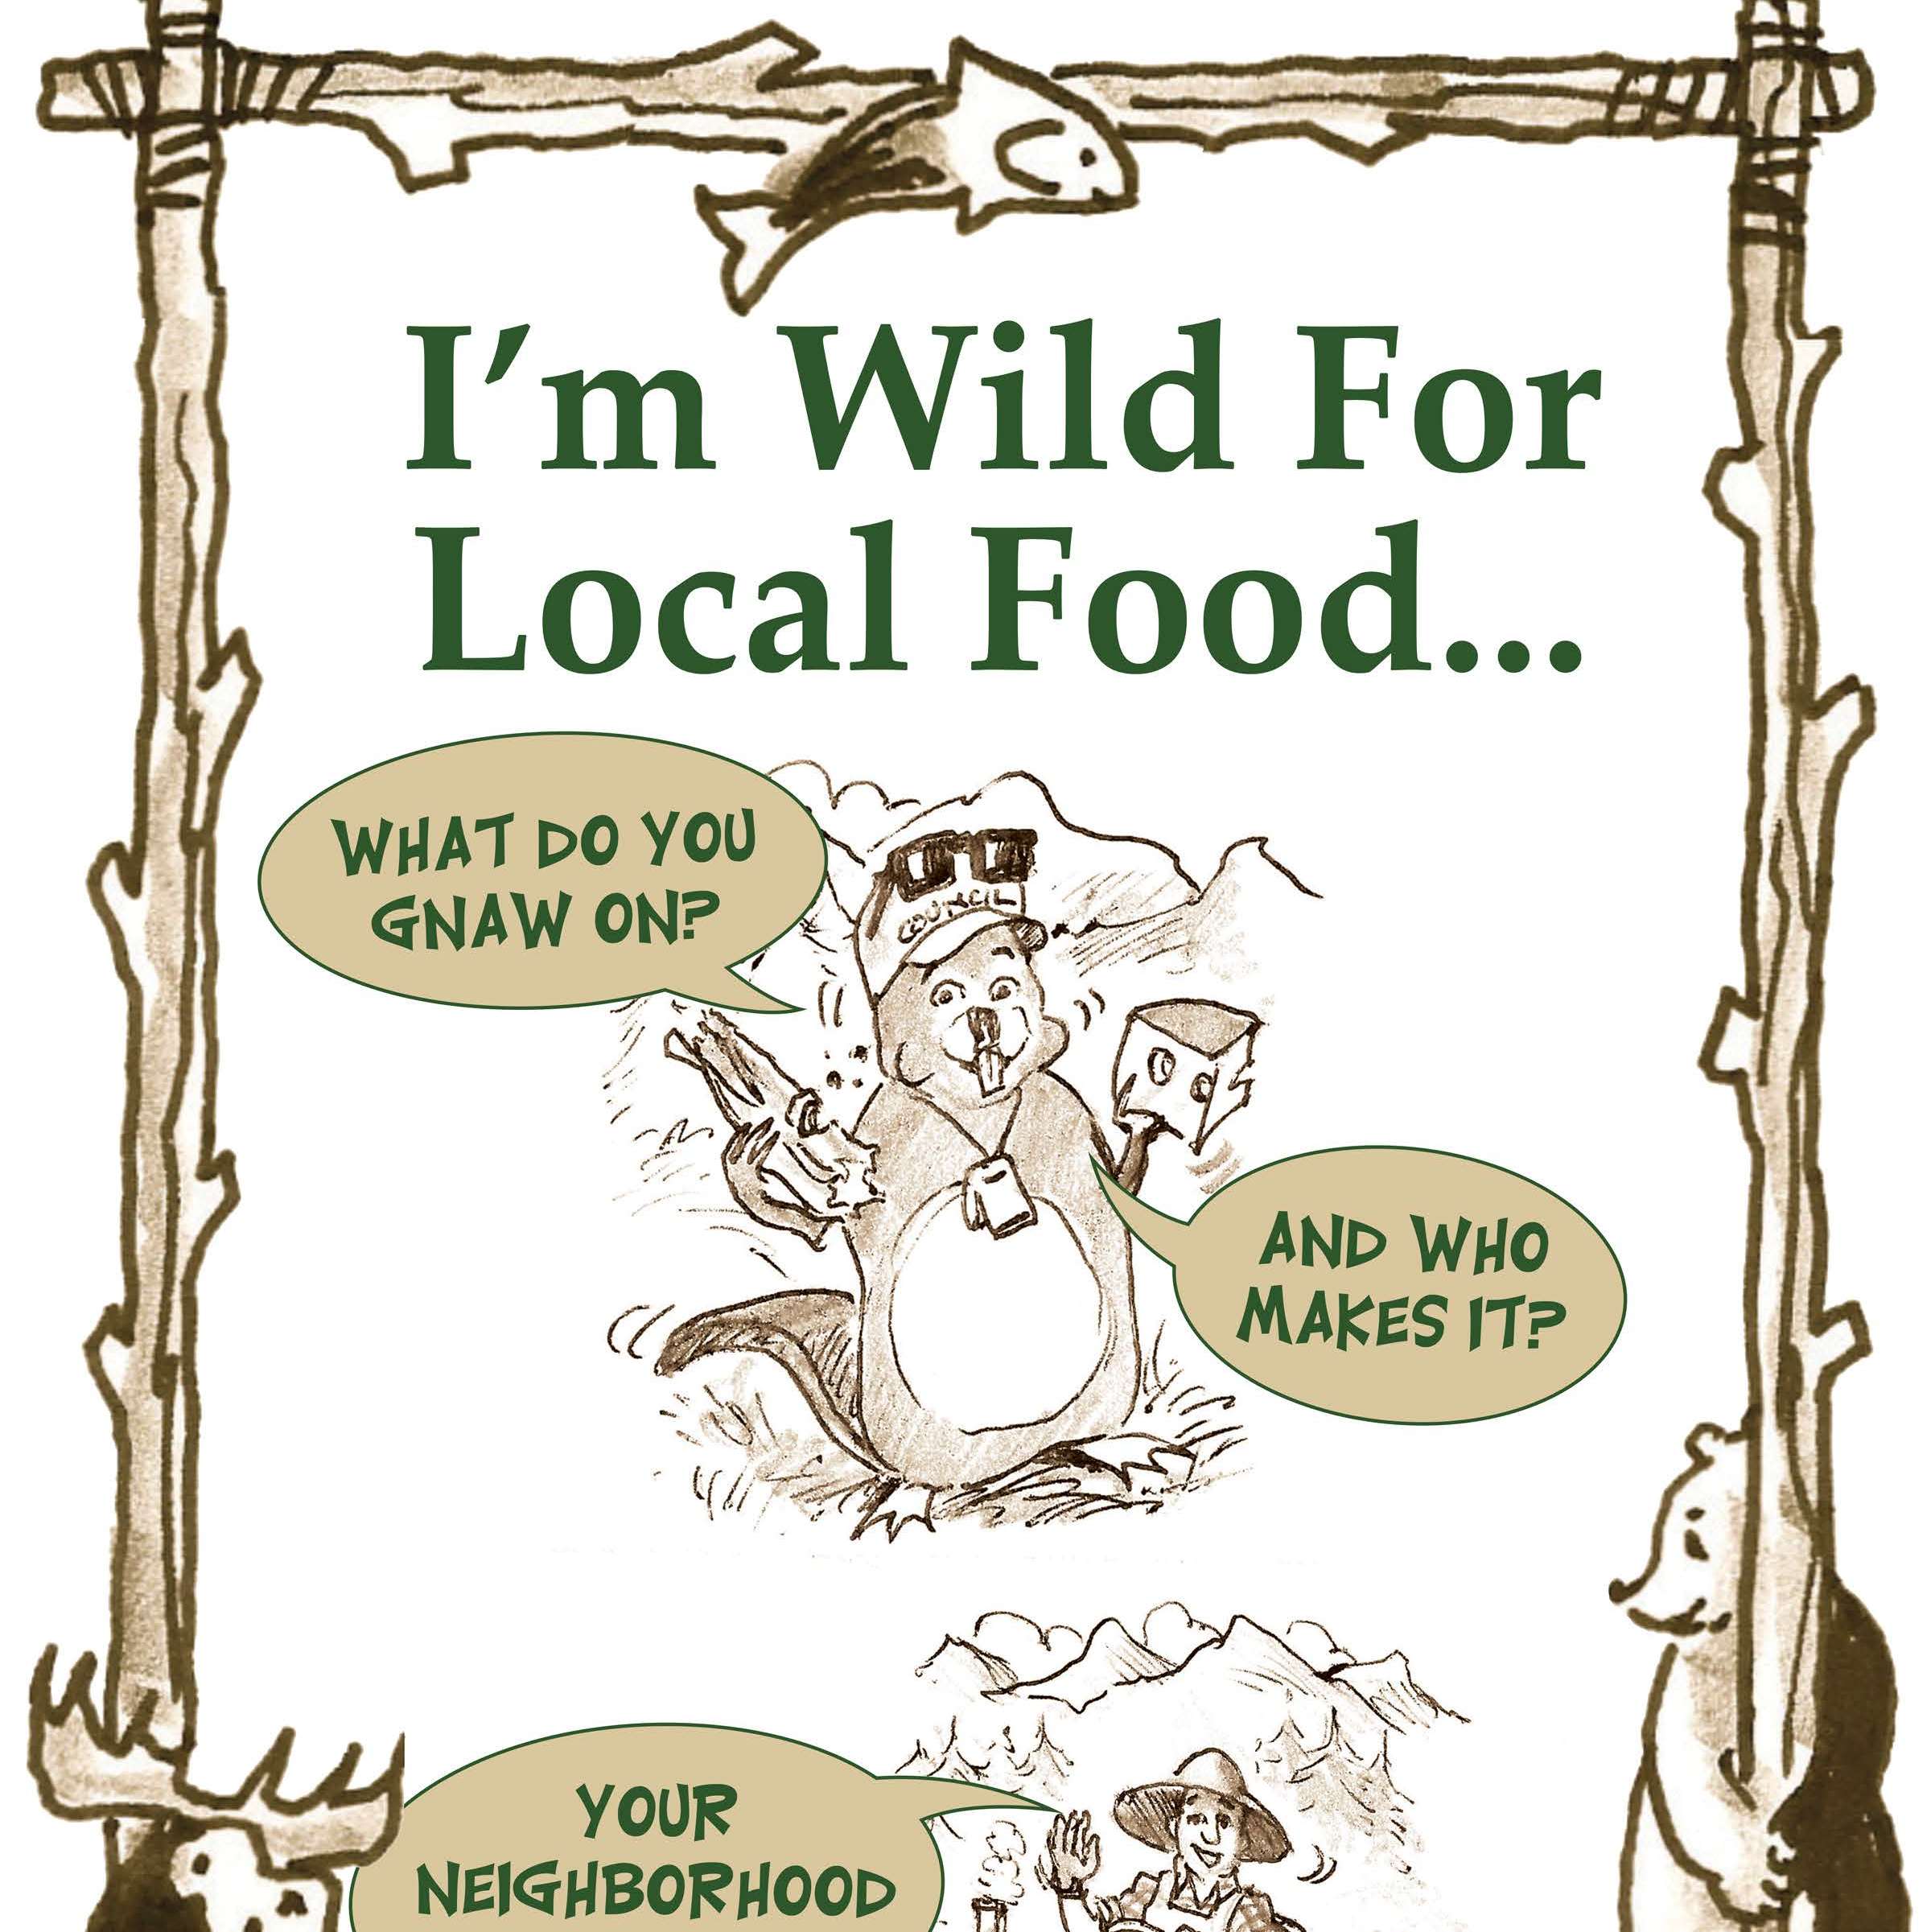 Council Helps Spread the Word - Eat Local!